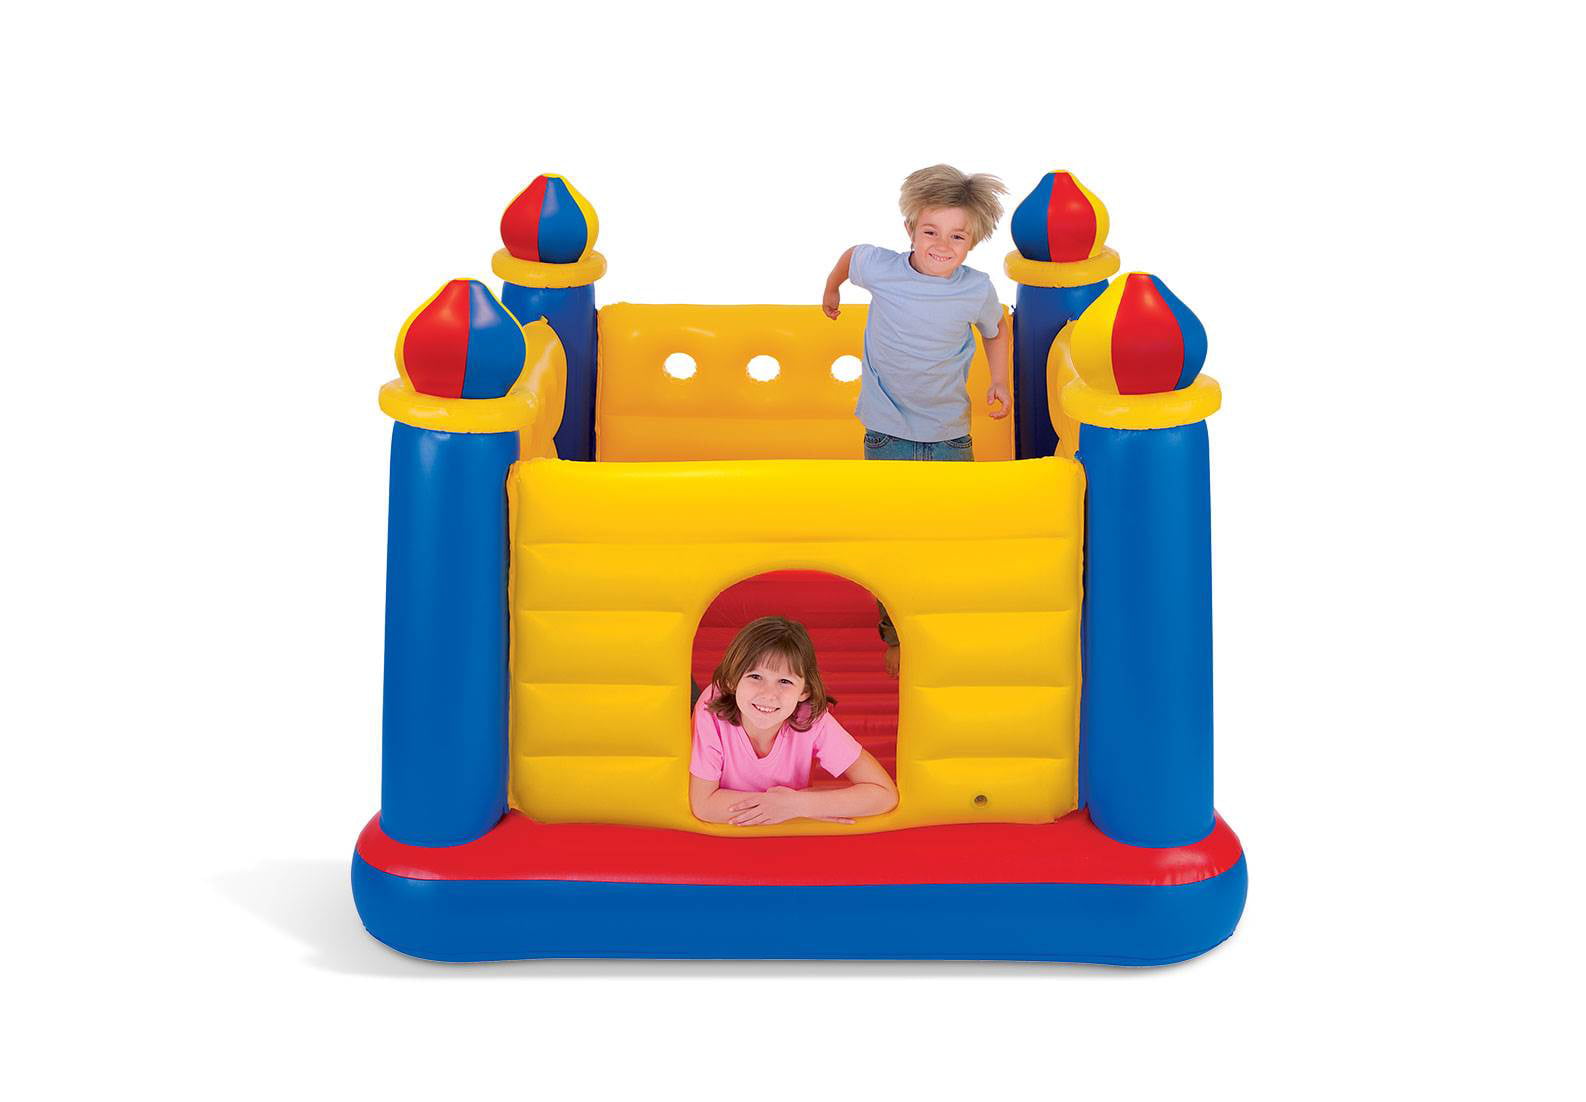 Details about   Playhouse Jump O Lene Inflatable bounce house Outdoor Indoor Mesh door New 